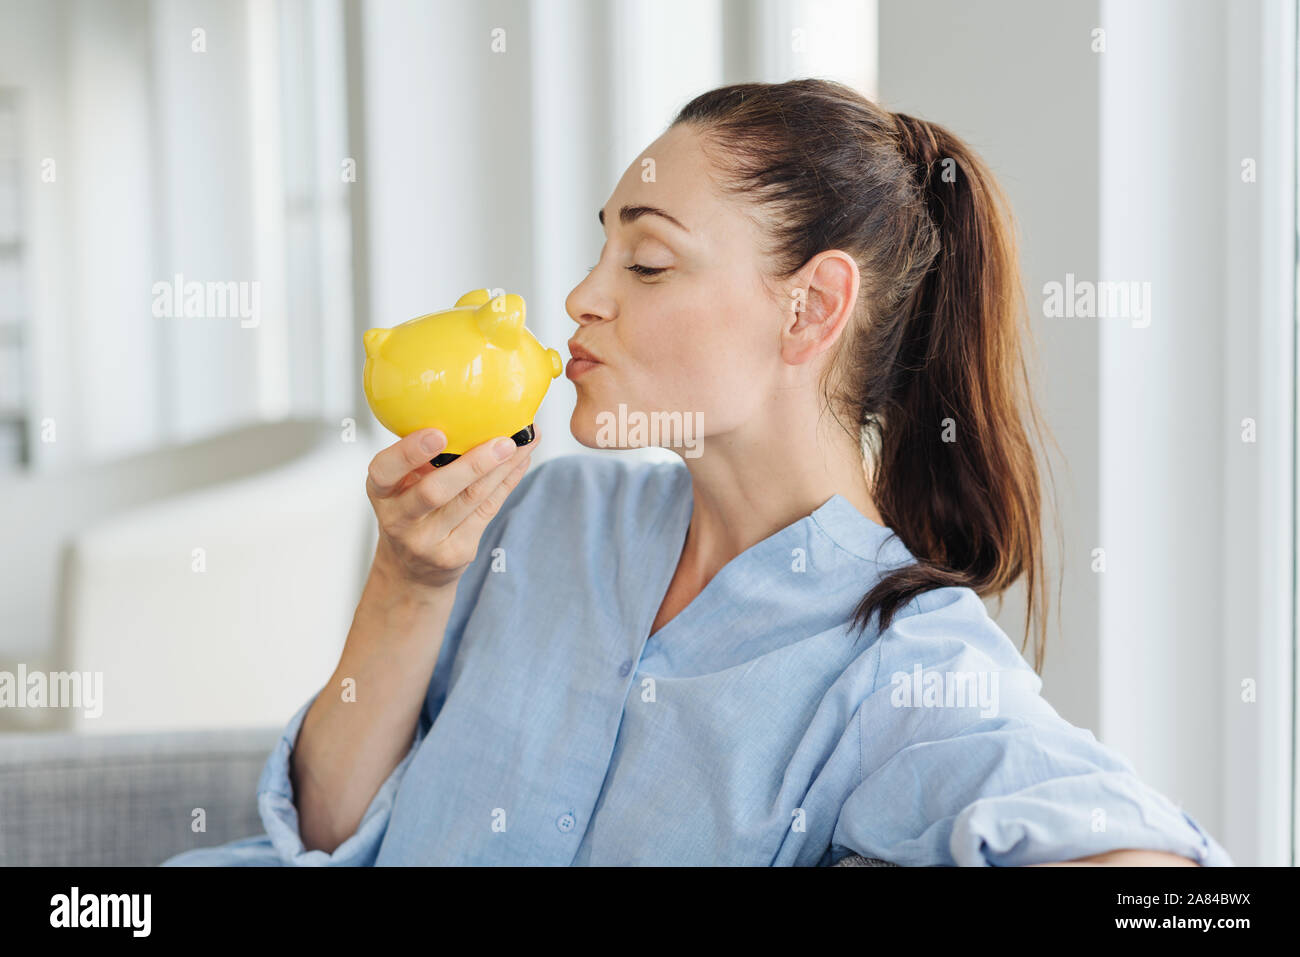 Successful young woman kissing a piggy bank as she relaxes on a sofa as she imagines how she is going to spend her nest egg Stock Photo